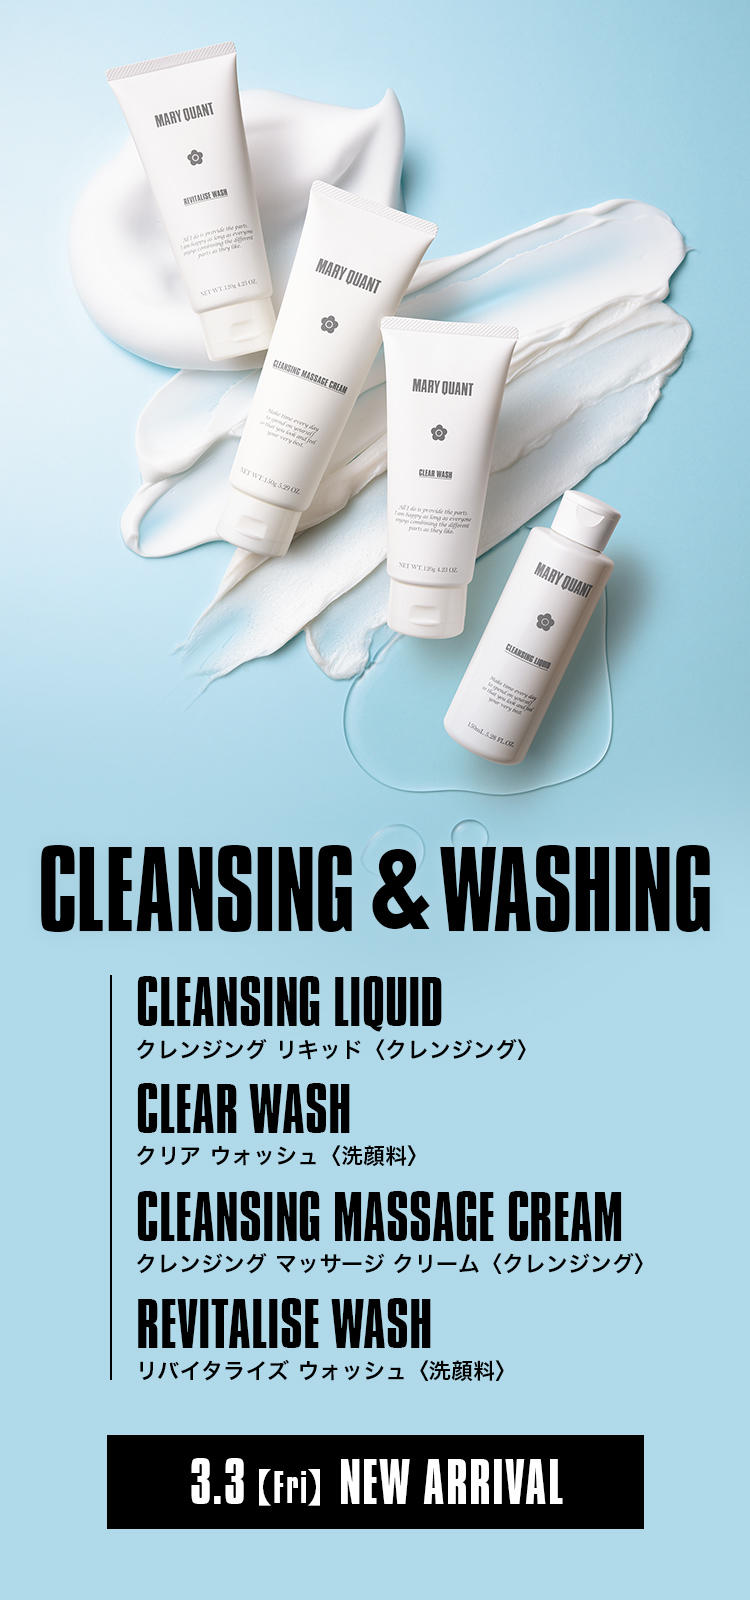 CLEANSING & WASHING｜MARY QUANT COSMETICS LTD.